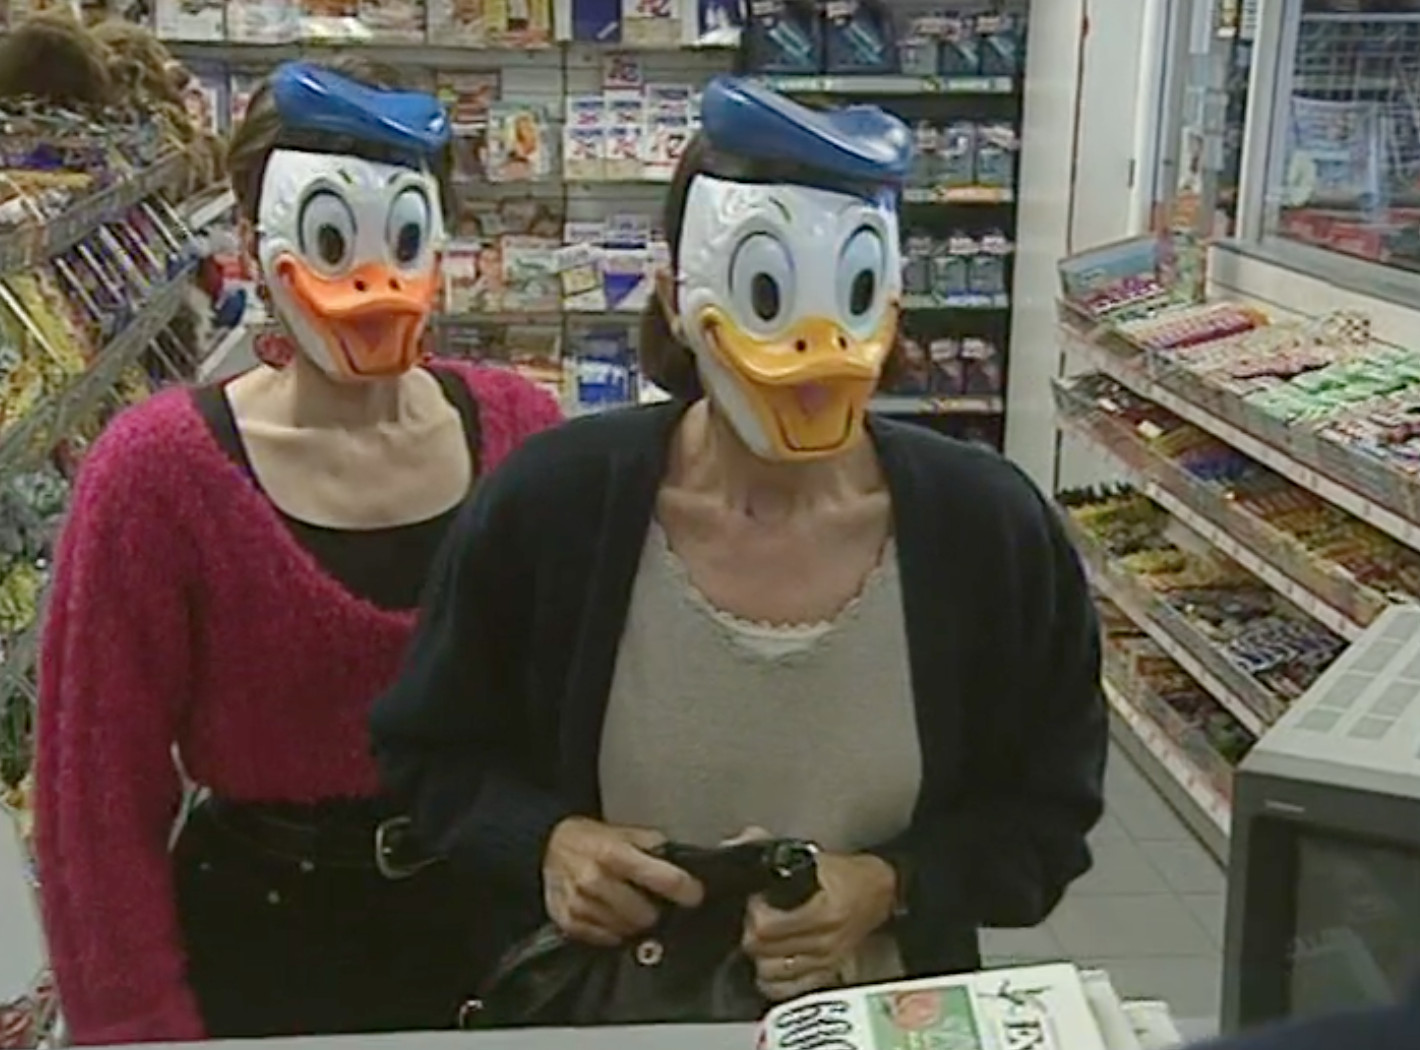 Bill in a Donald Duck mask accidentally robbing a petrol station